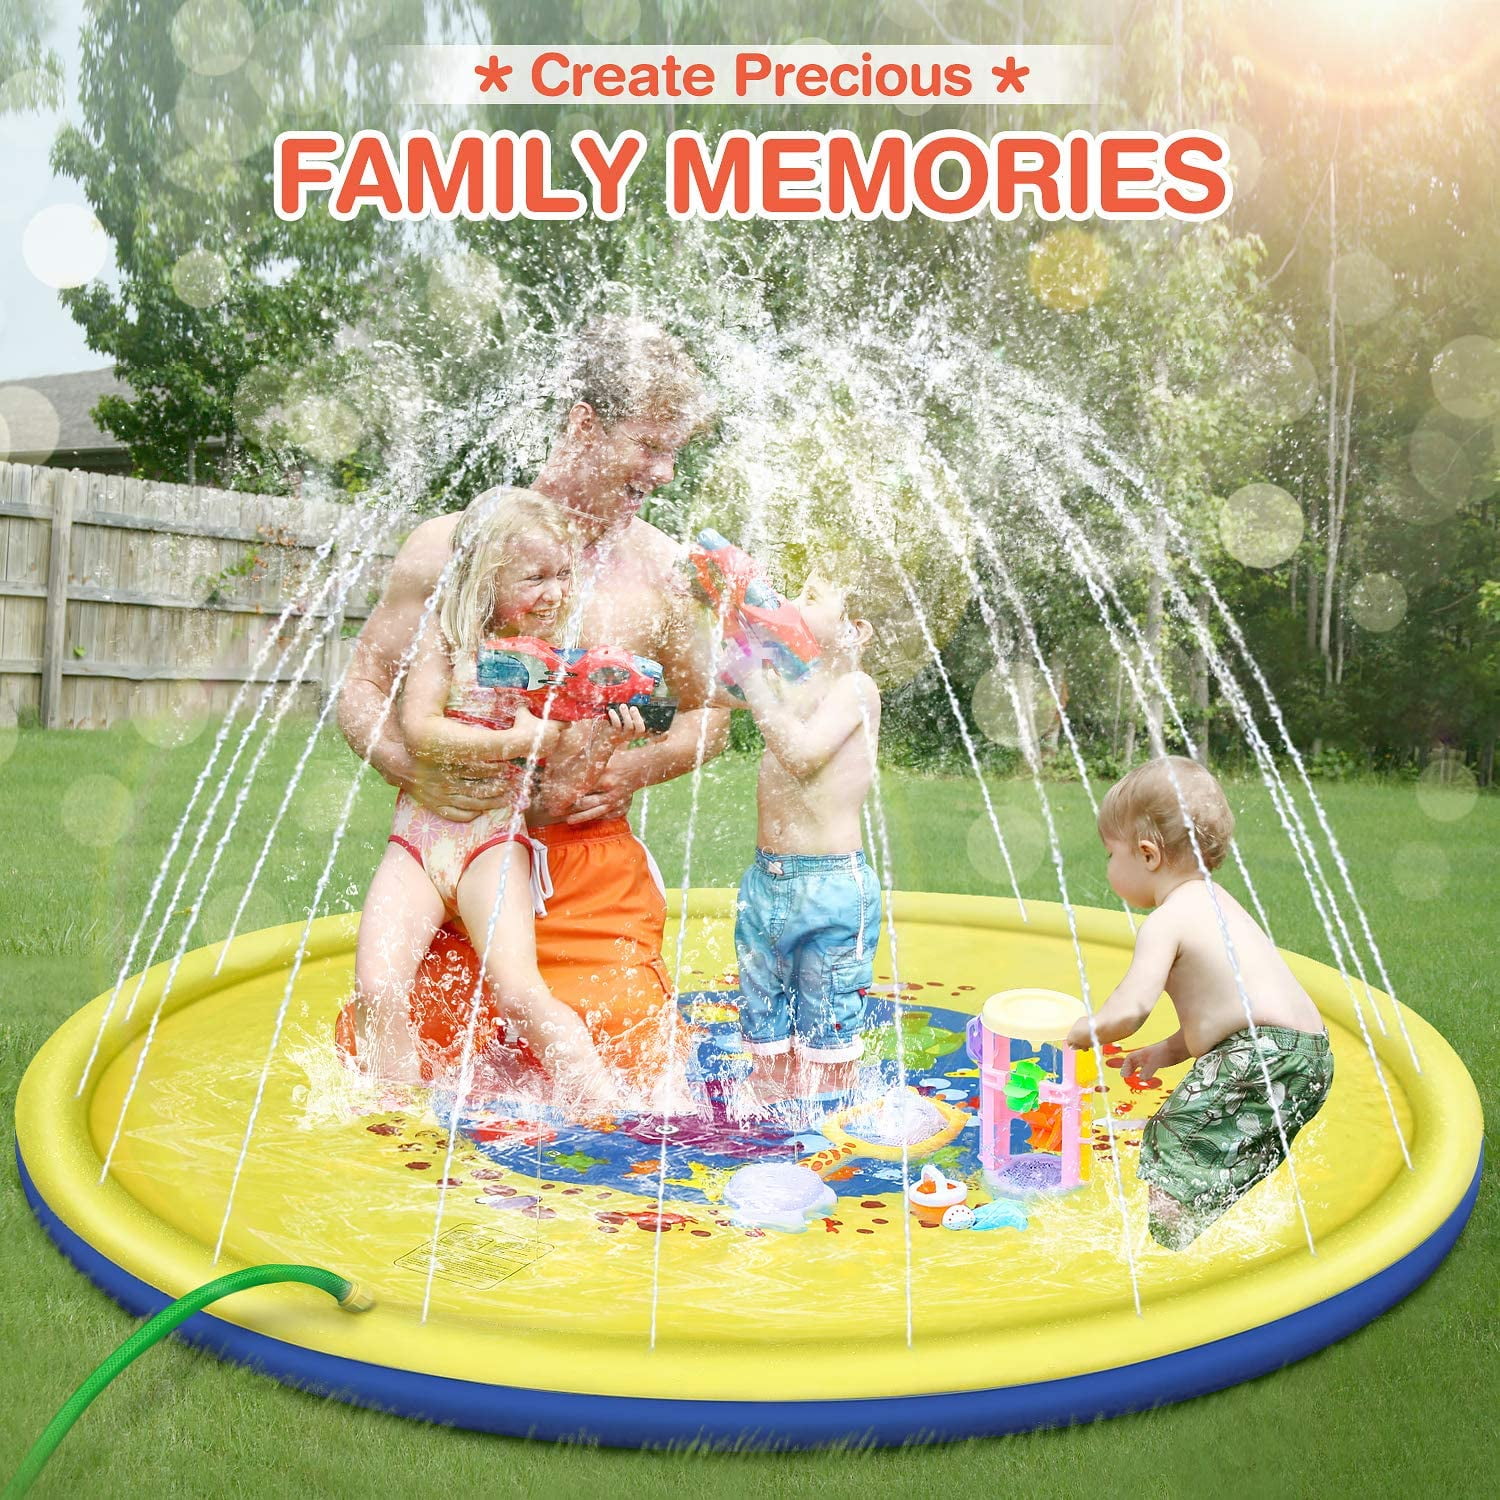 69 Dkhilly 69in-Diameter Sprinkle and Splash Play Mat for Kids Outdoor Water Toys Fun for Kids Exclusive Beautiful Design D 